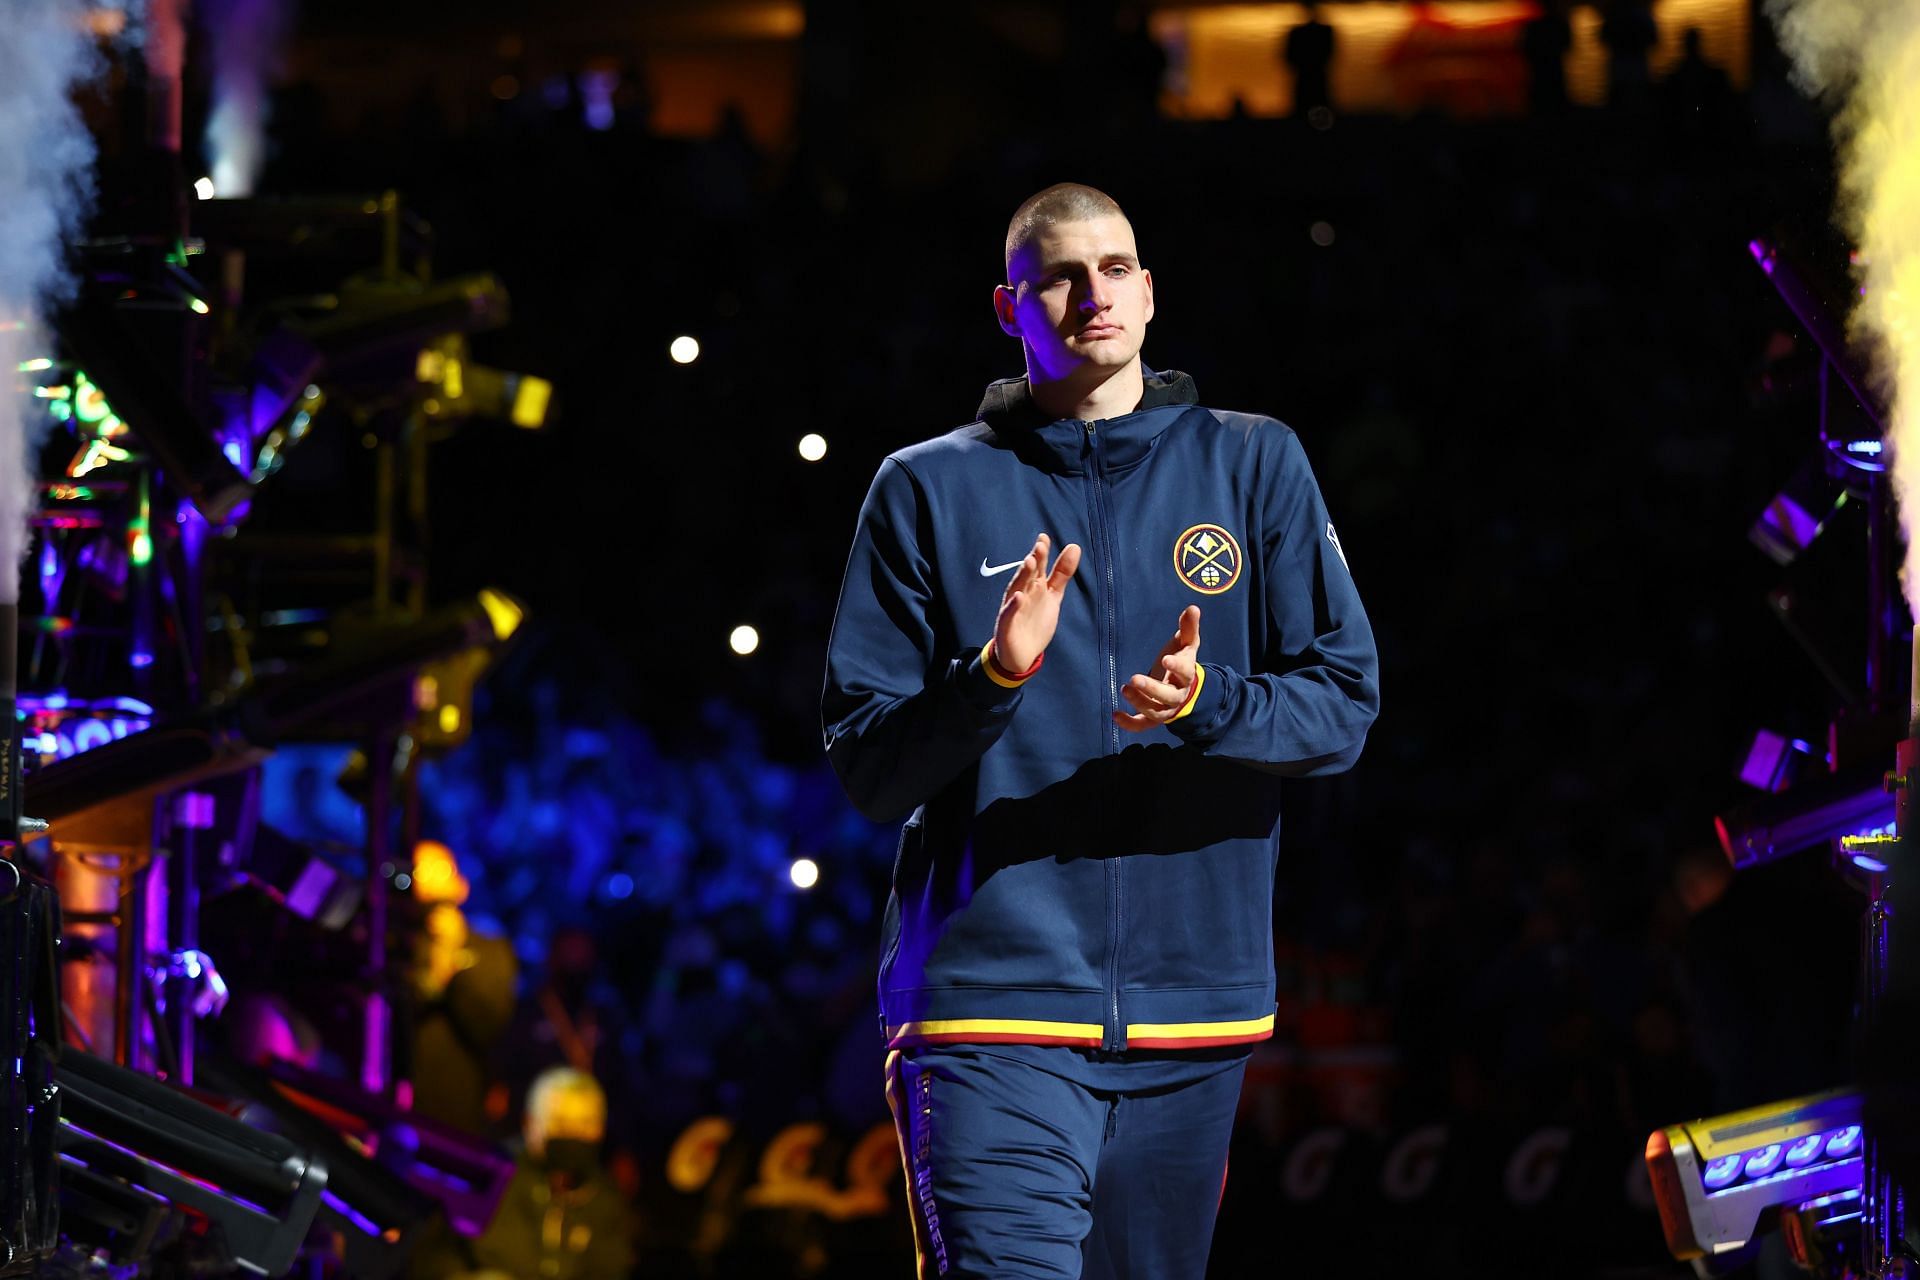 Nikola Jokic continues to put up eye-opening numbers in the NBA for the Denver Nuggets